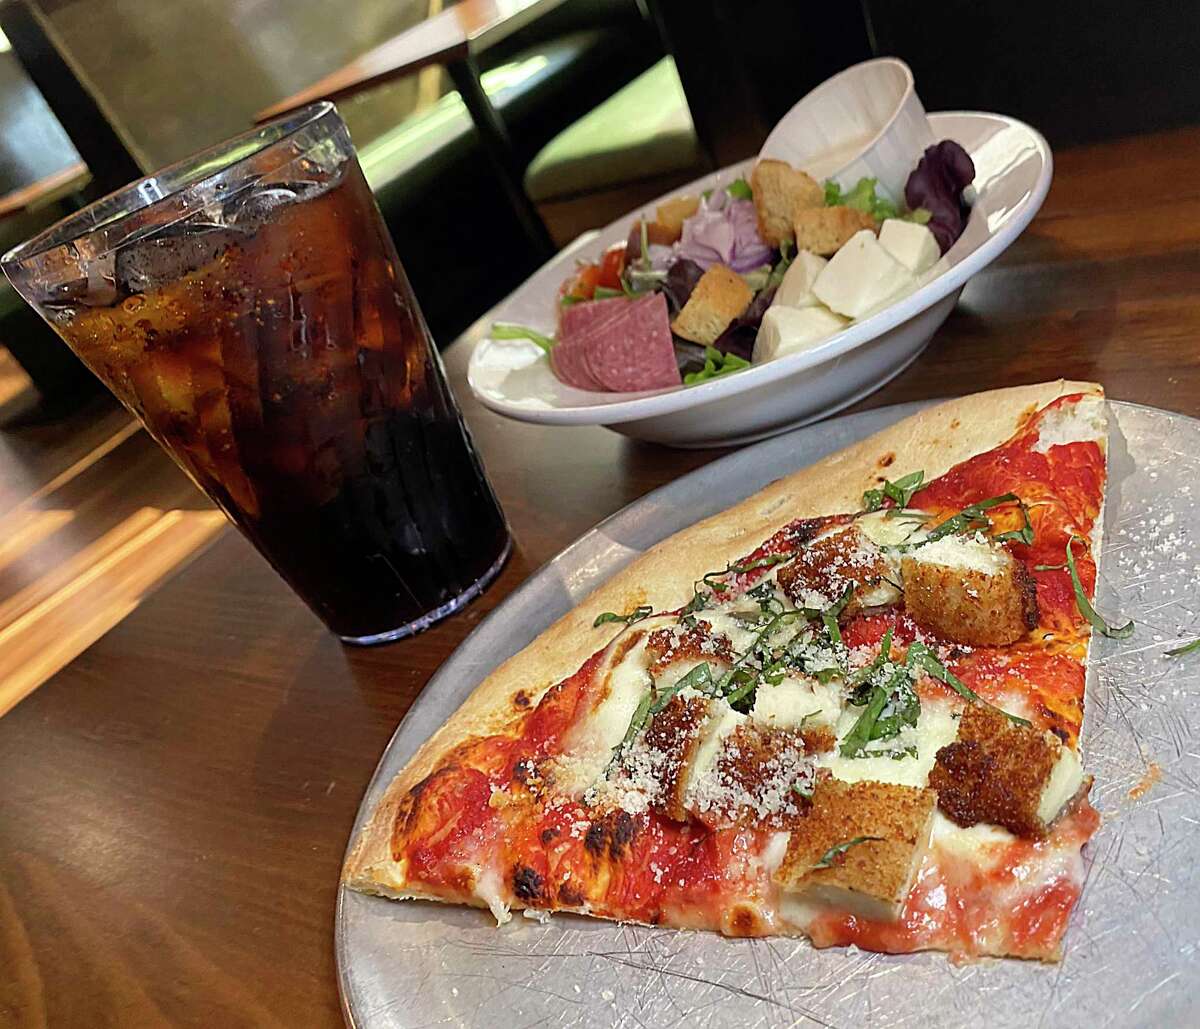 A pizza combo includes a slice of pizza such as this daily special of Chicken Parmesan (fried chicken, red sauce, basil, Parmesan cheese and housemade mozzarella), a soft drink and a salad for $9 at Bootleggers Pizza Parlor in New Braunfels.